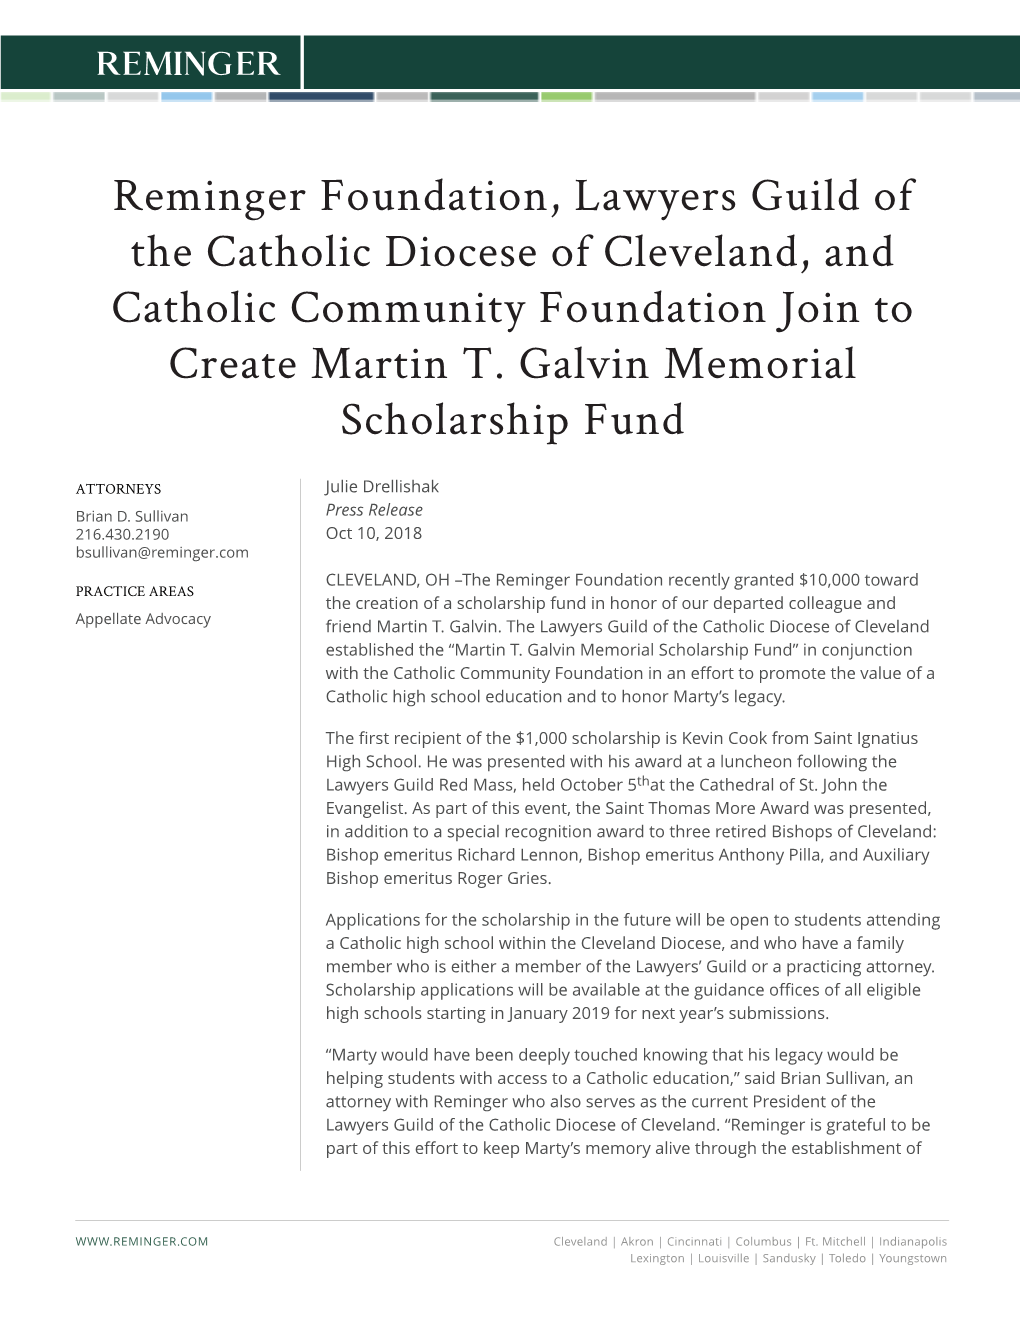 Reminger Foundation, Lawyers Guild of the Catholic Diocese of Cleveland, and Catholic Community Foundation Join to Create Martin T